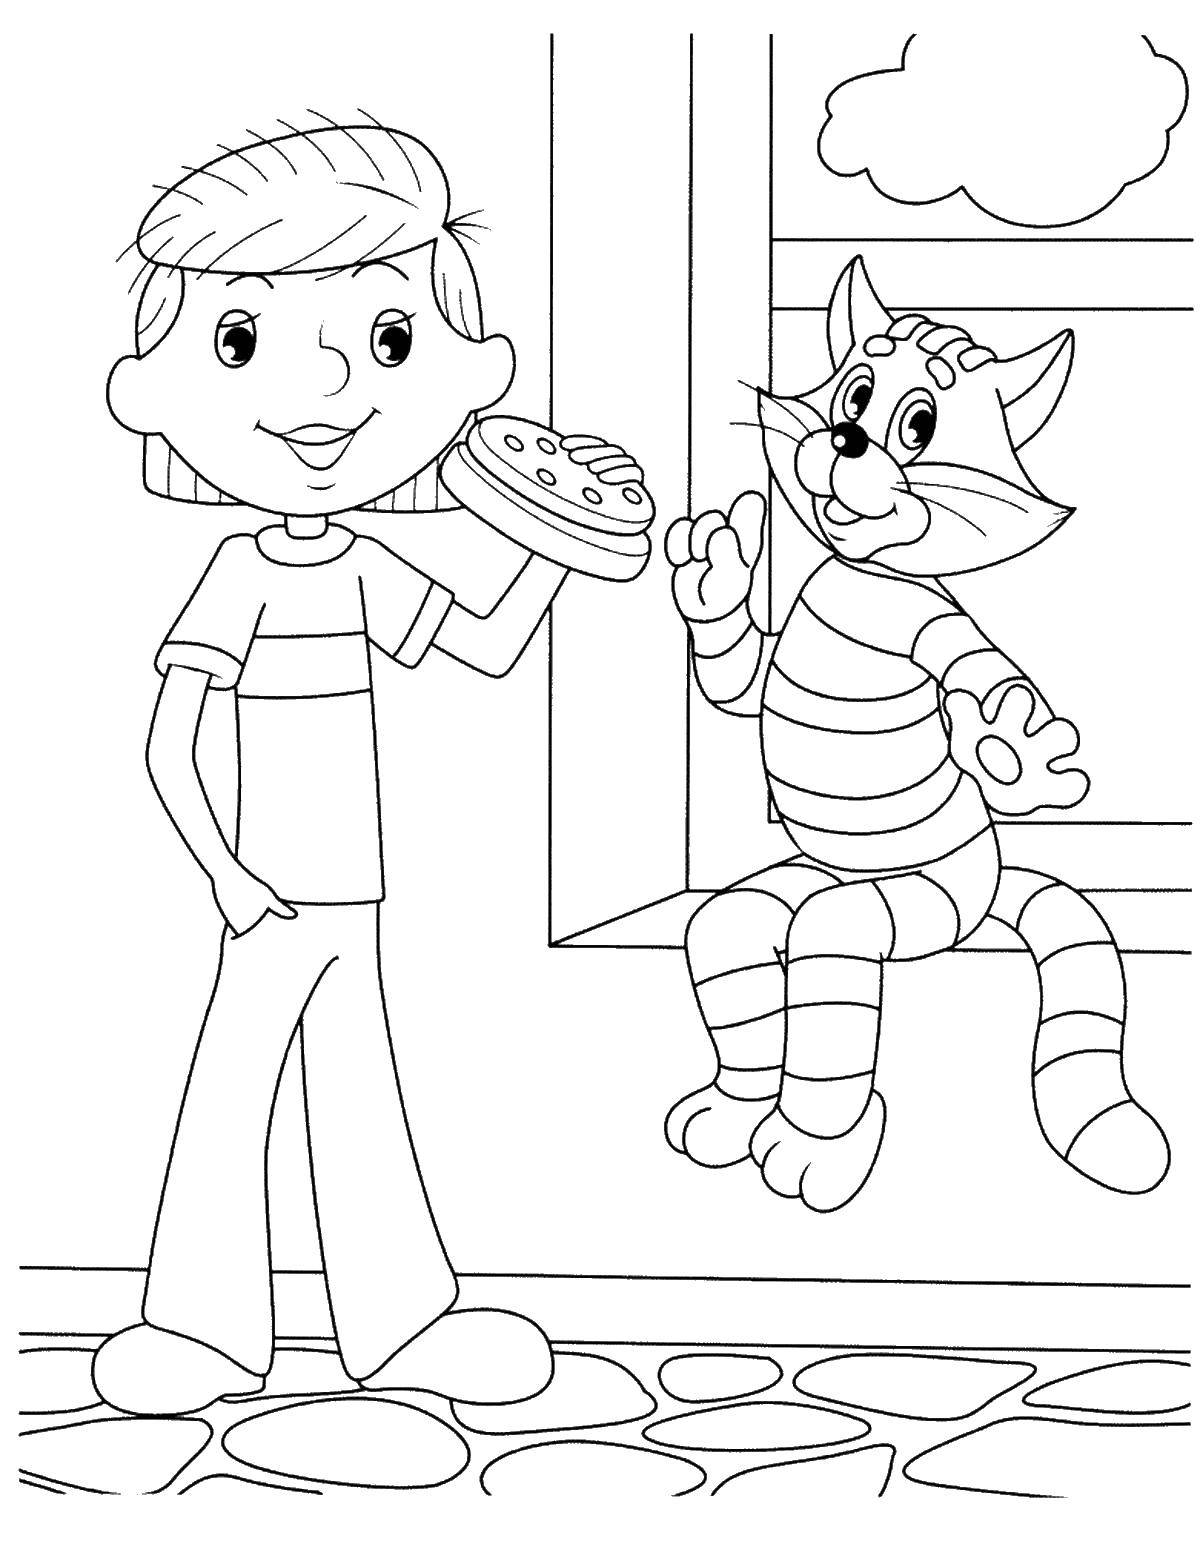 Coloring Kot Matroskin and uncle Fedor in the entrance. Category coloring, buttermilk. Tags:  the cat Matroskin, dog Sharik, Uncle Fyodor.